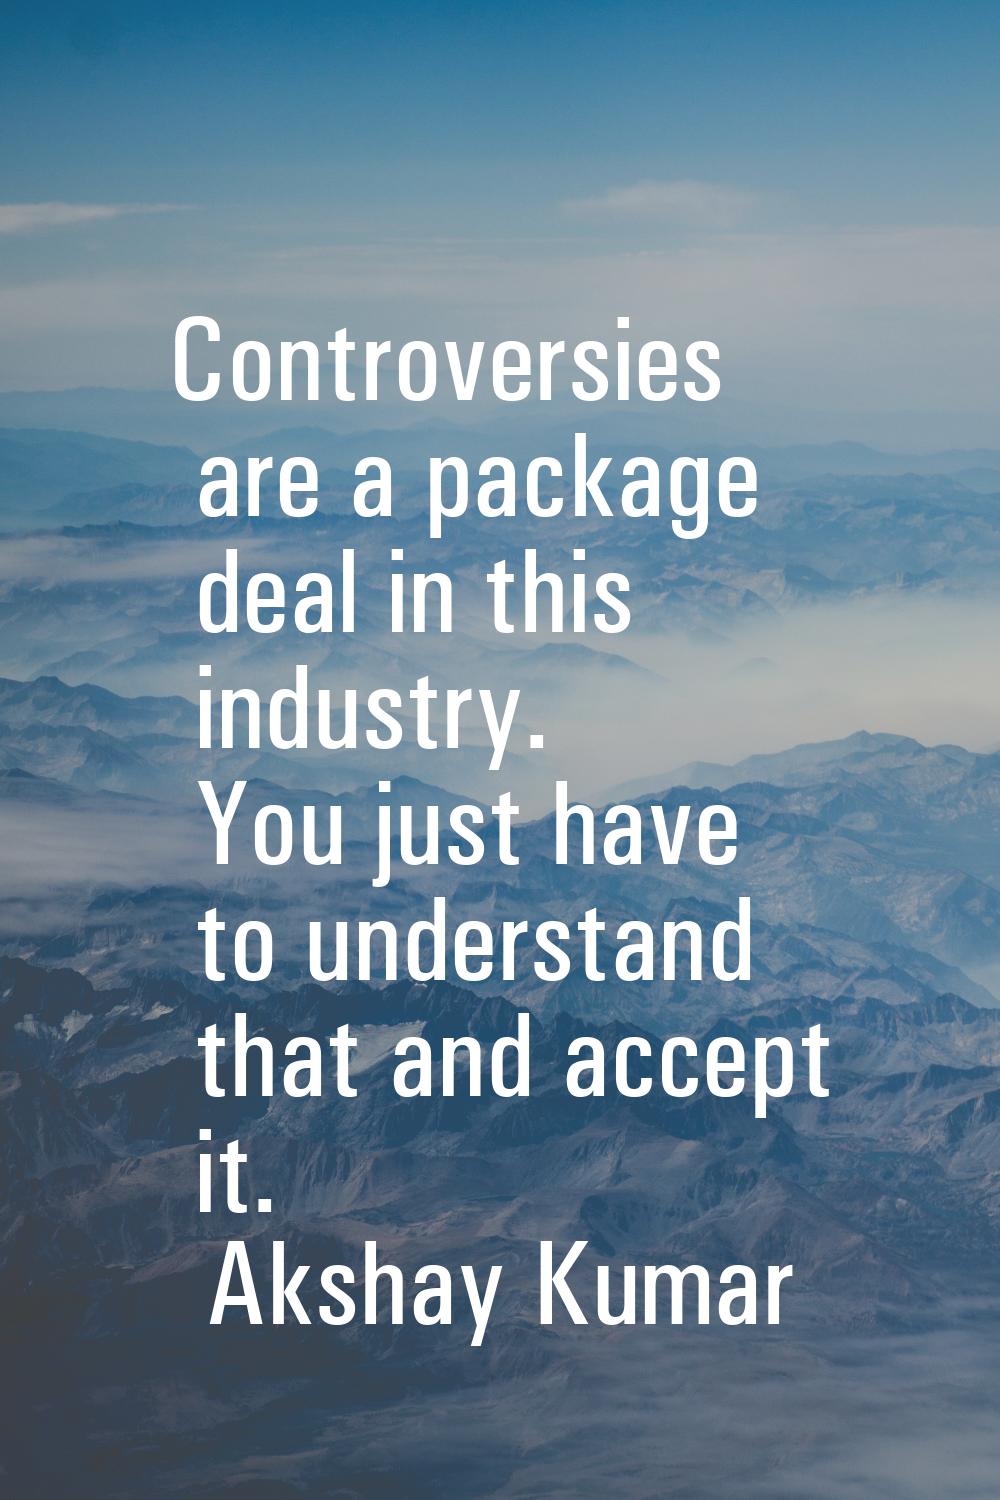 Controversies are a package deal in this industry. You just have to understand that and accept it.